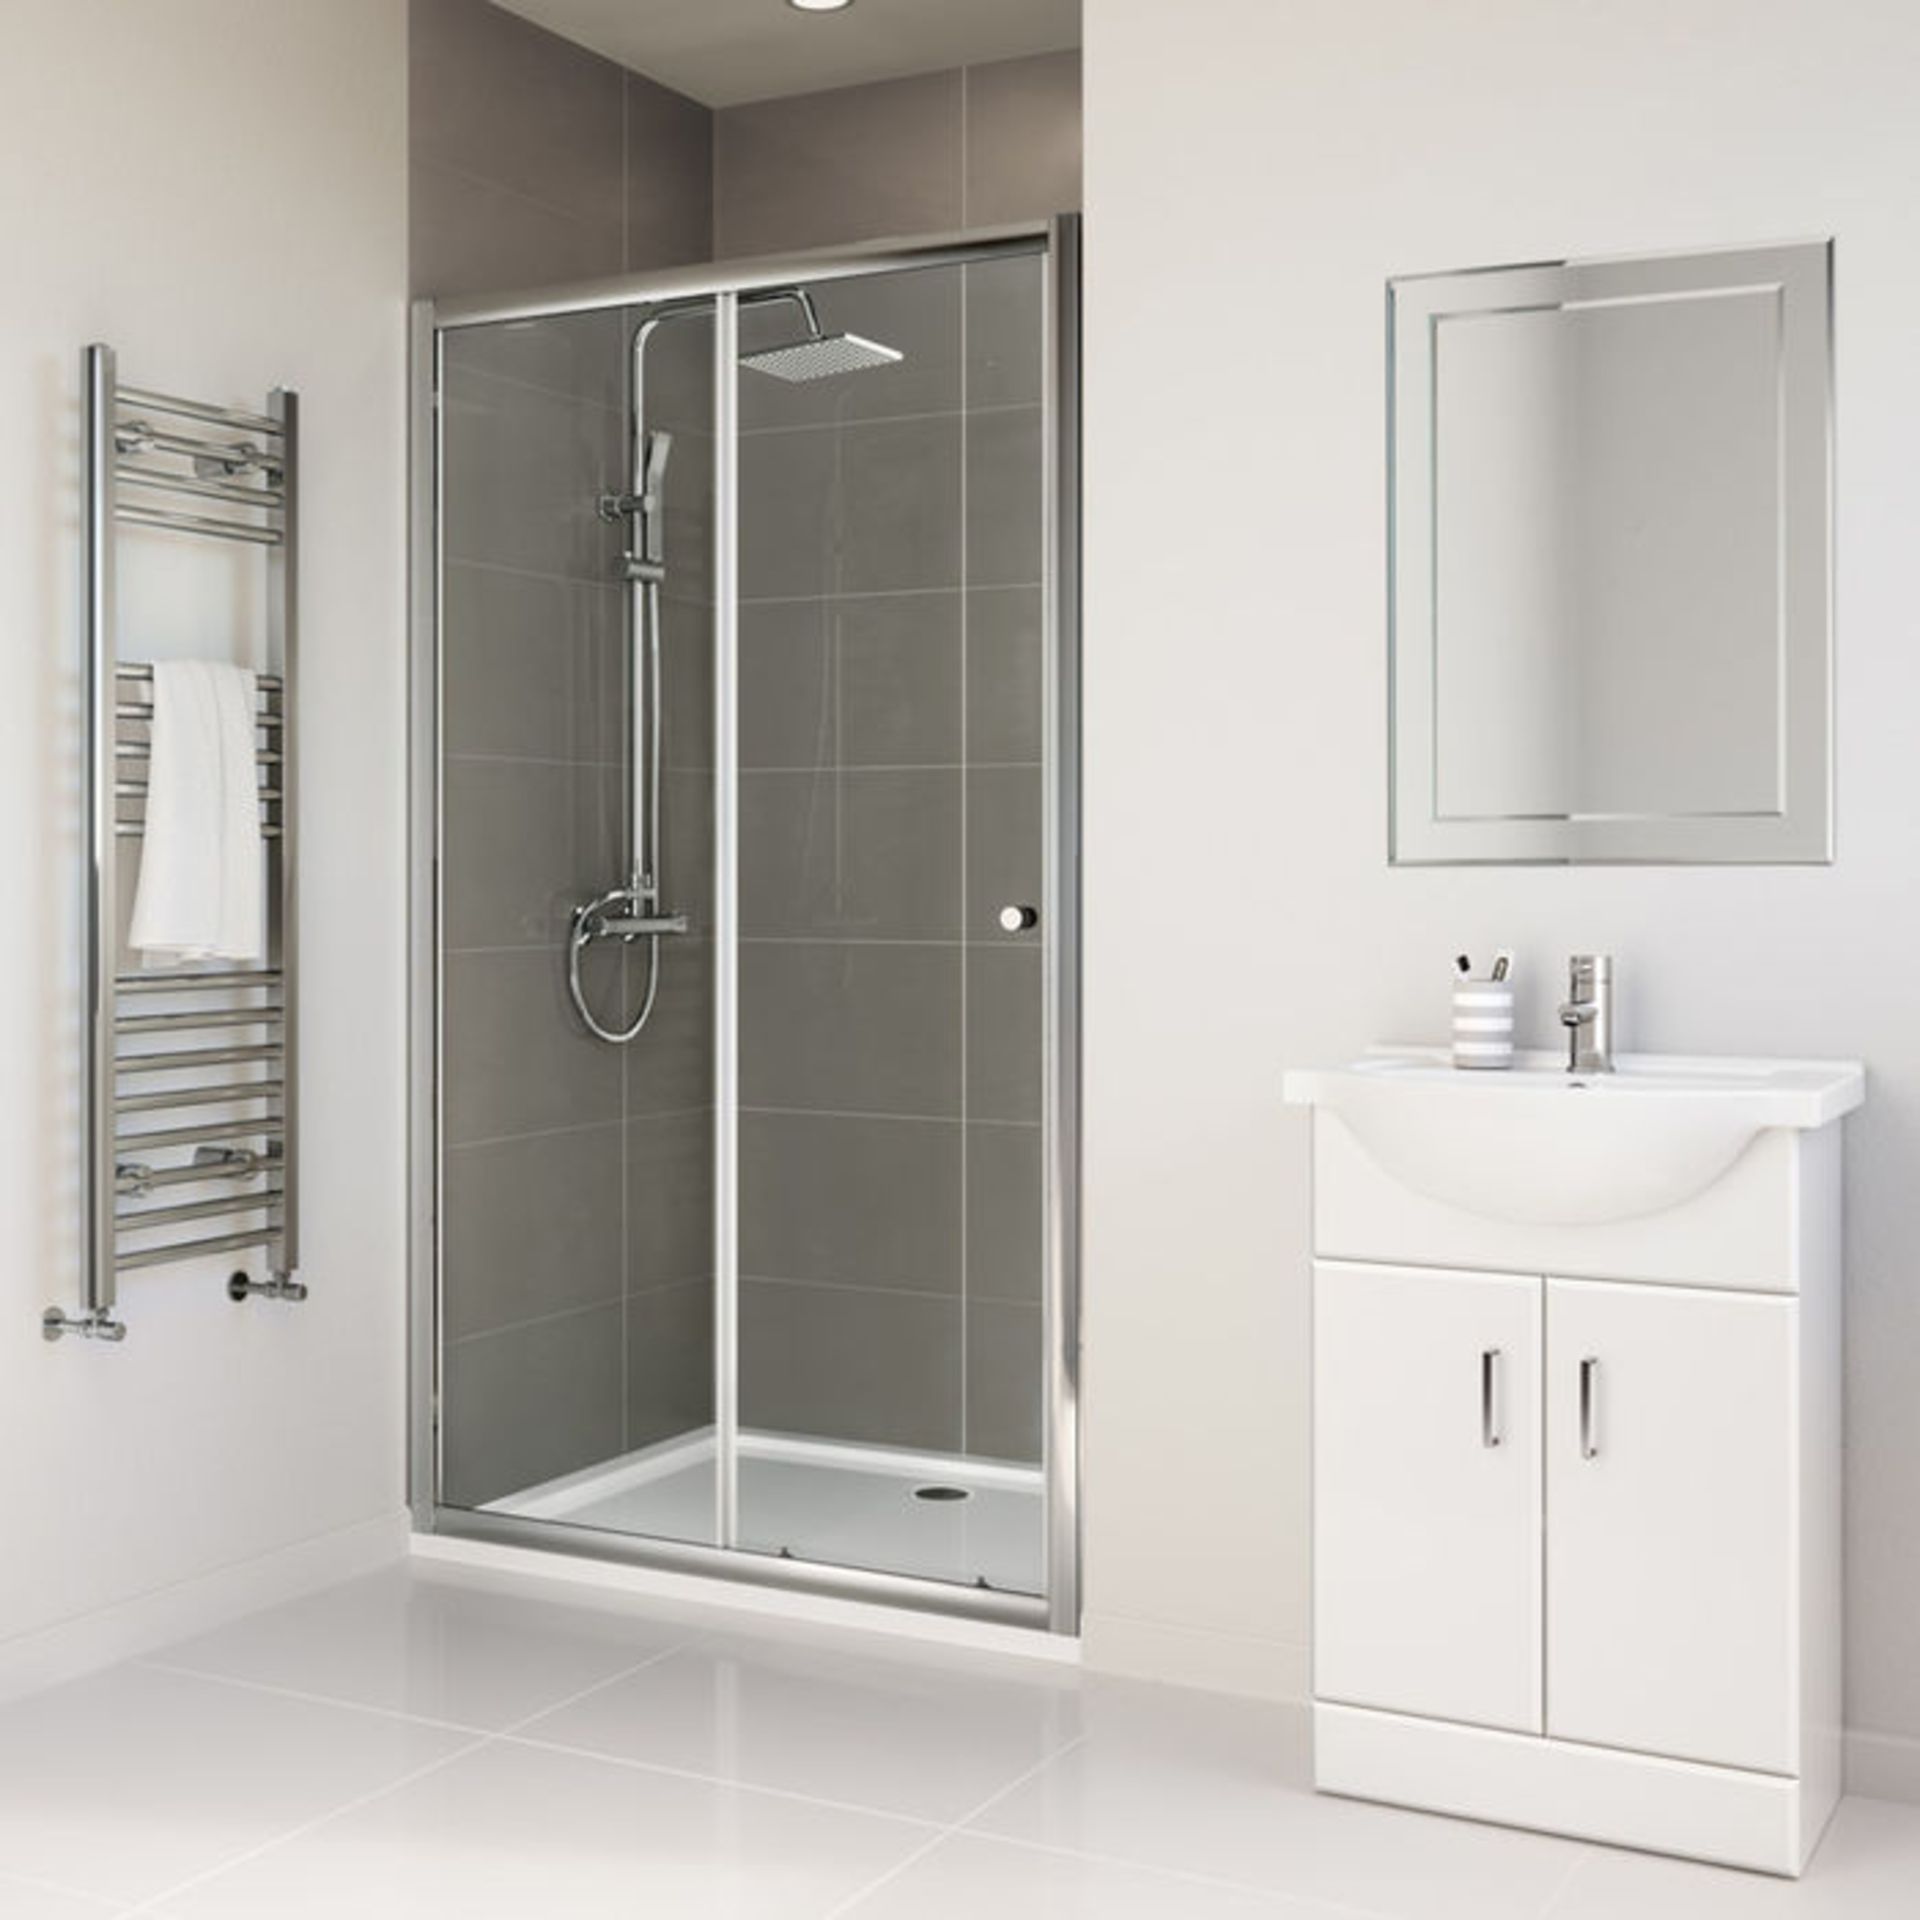 (TS101) 1200mm - Elements Sliding Shower Door. RRP £299.99. 4mm Safety Glass Fully waterproof tested - Image 2 of 4